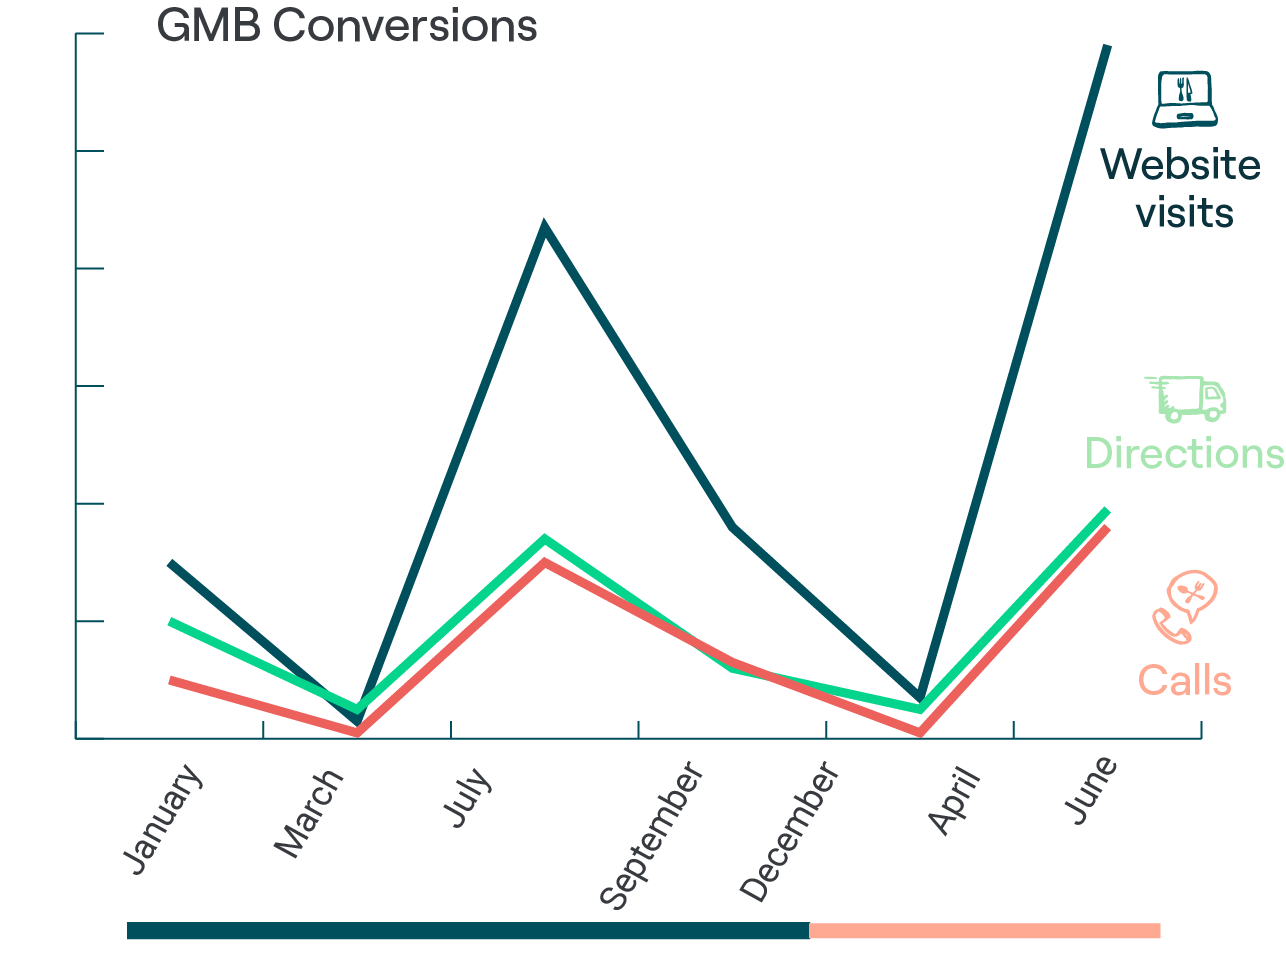 Graph to show GMB conversions for UK restaurants